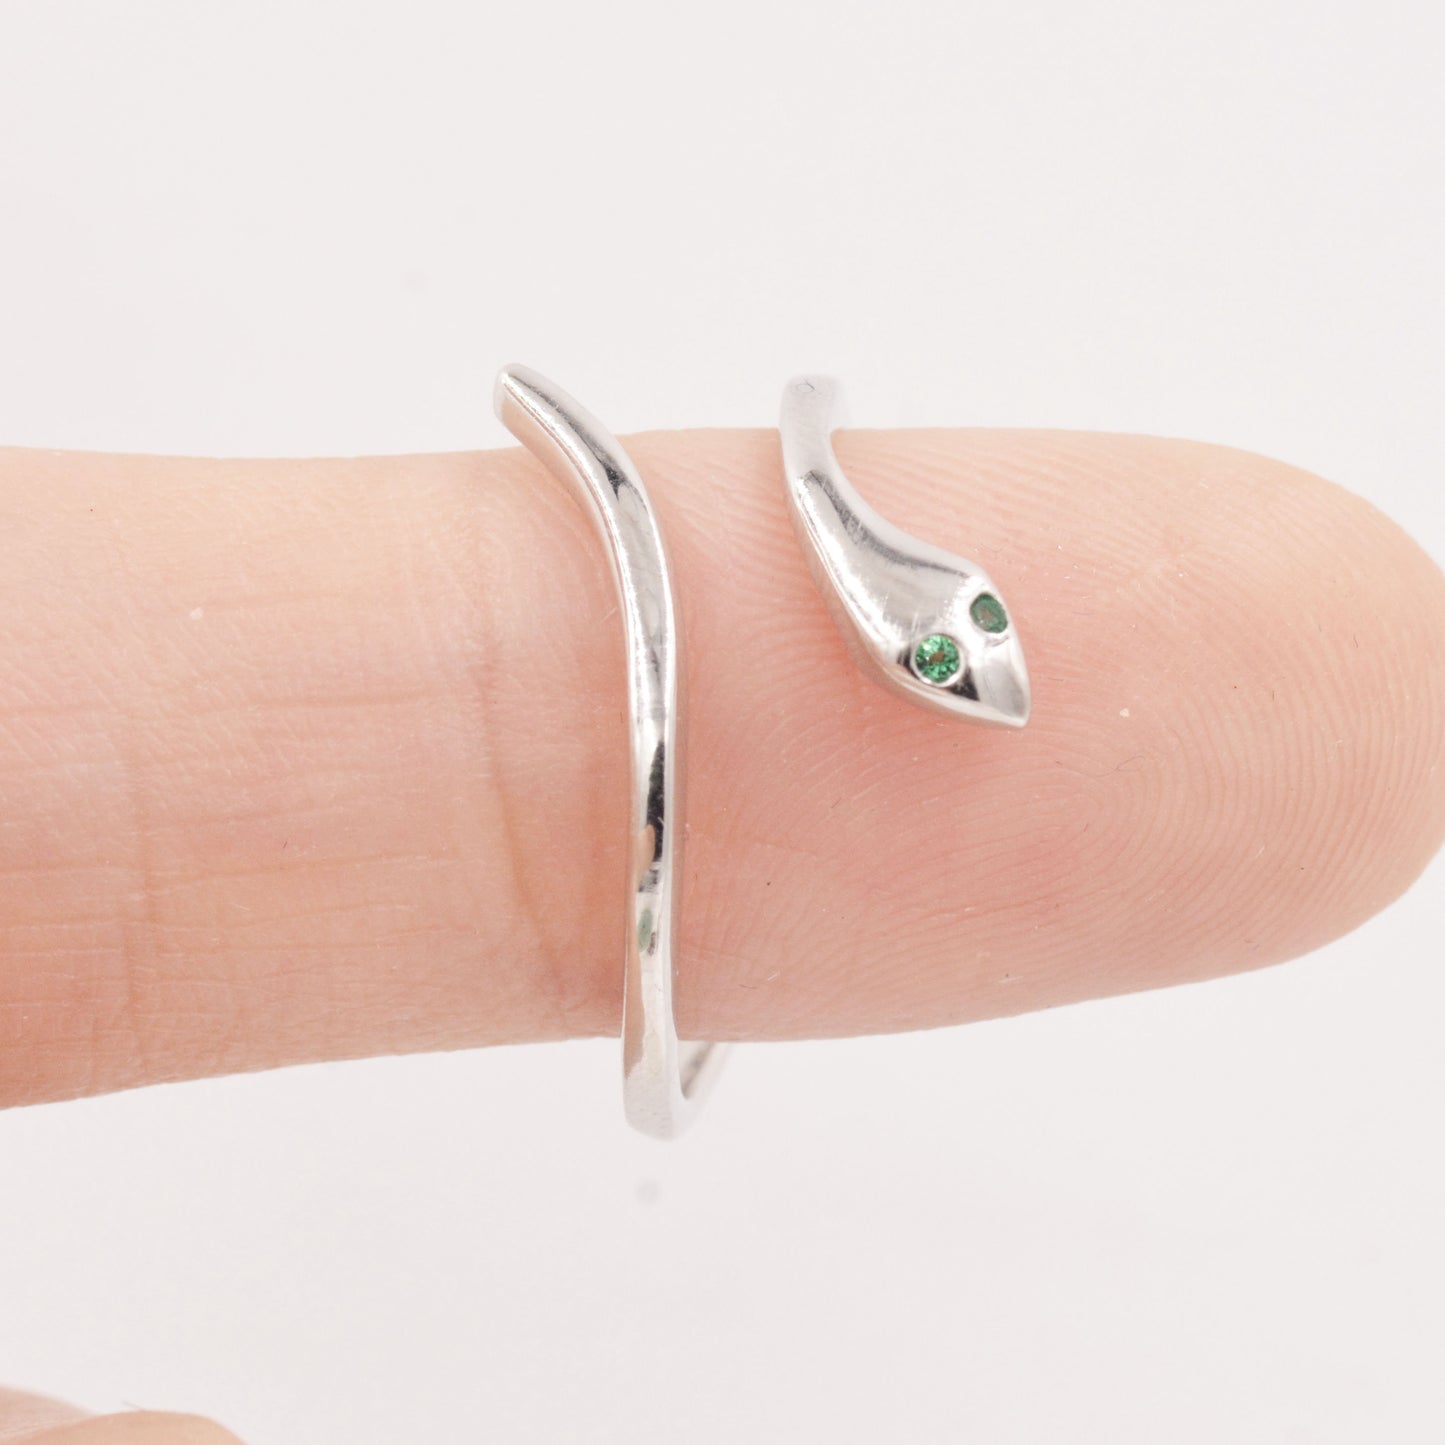 Snake Wrap Ring in Sterling Silver - Emerald Green Eyed Snake Ring - Adjustable and Available in Three Sizes